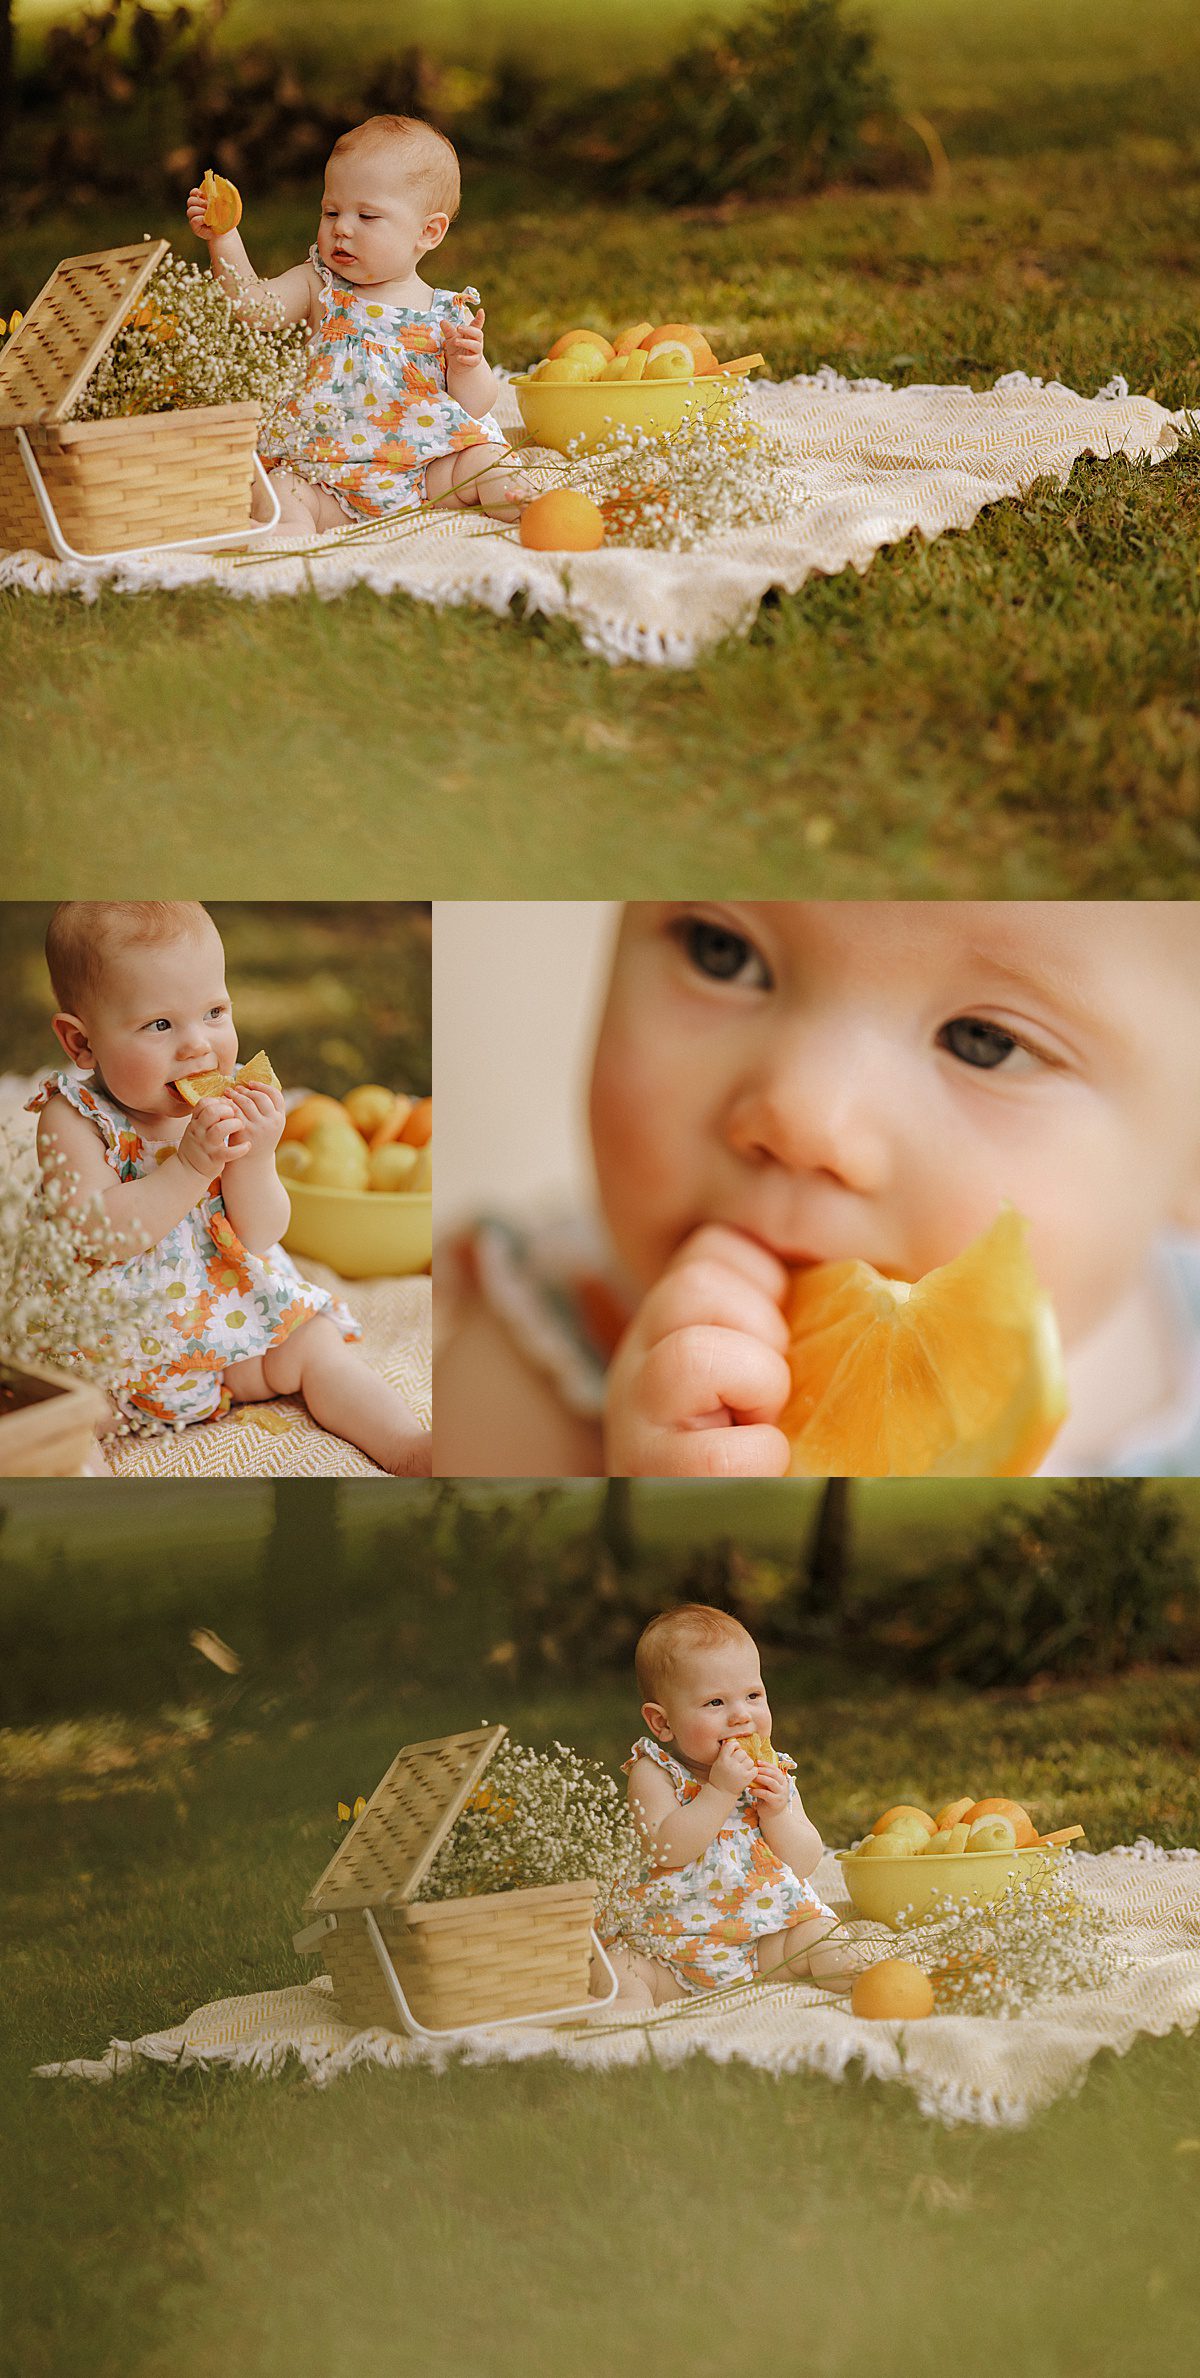 Baby girl sits on a picnic blanket eating an orange slice